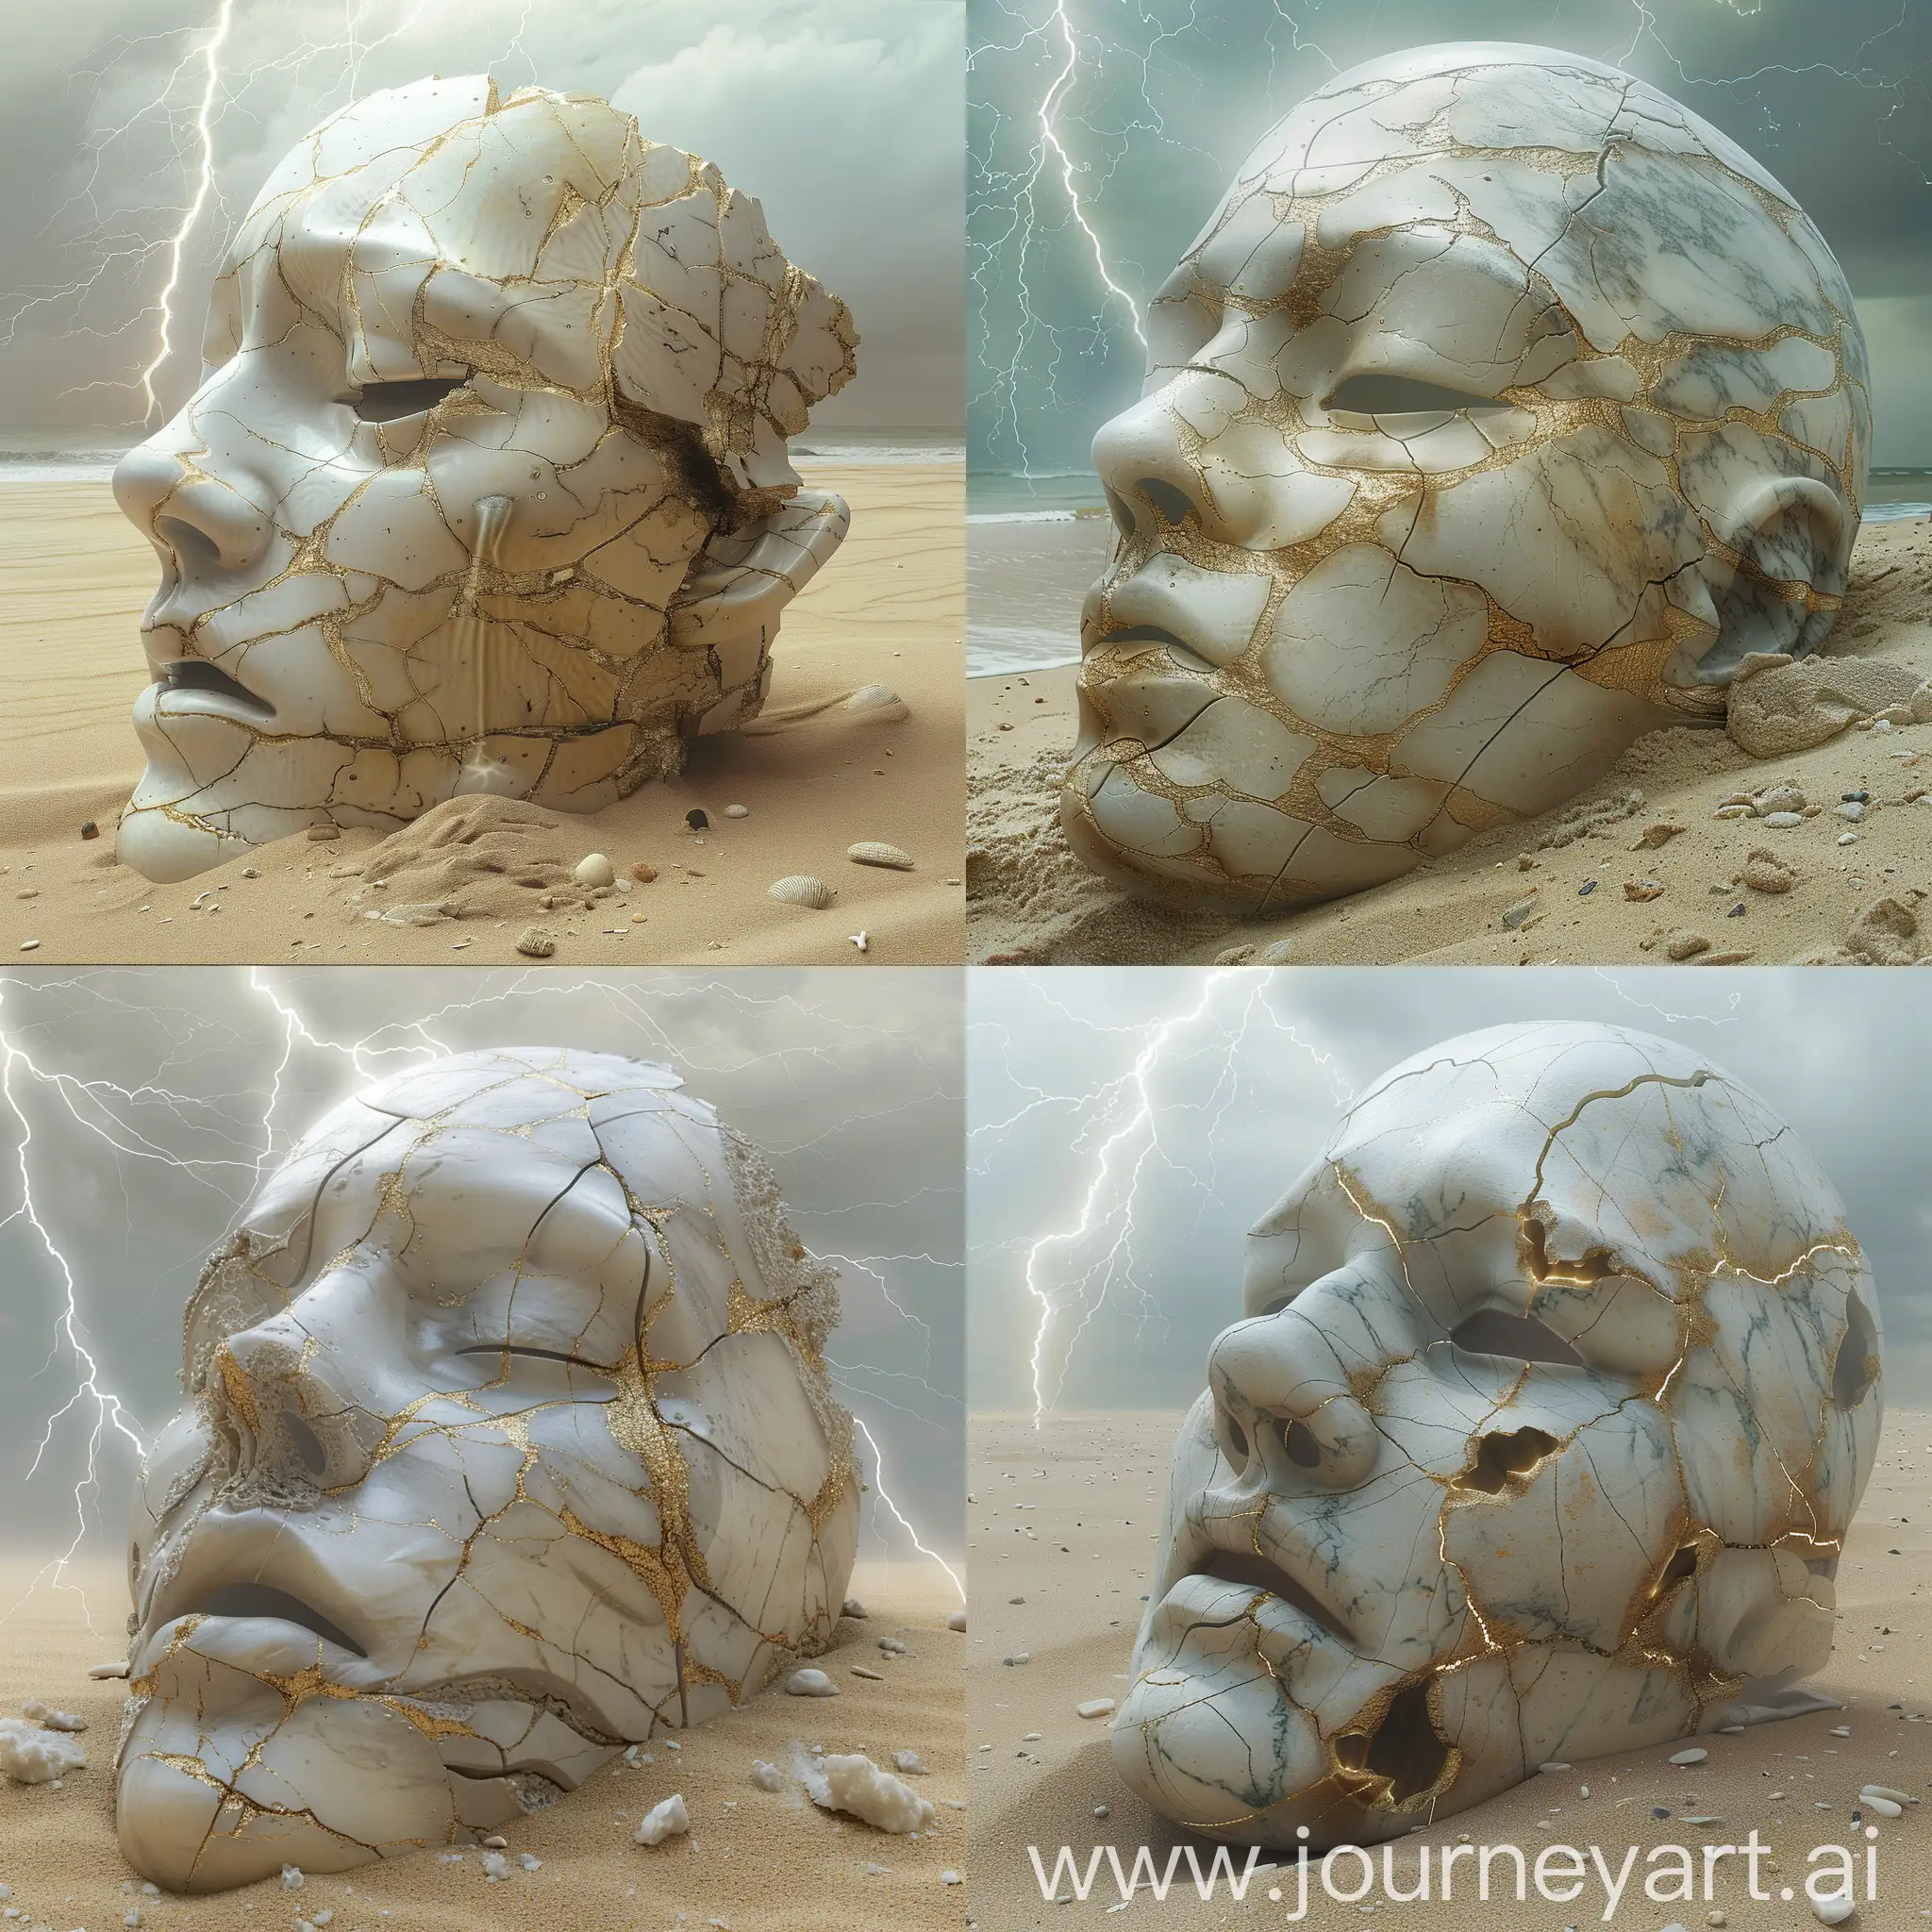 Hyperrealistic-Crumbled-Marble-Mask-with-Golden-Veins-on-Sandy-Beach